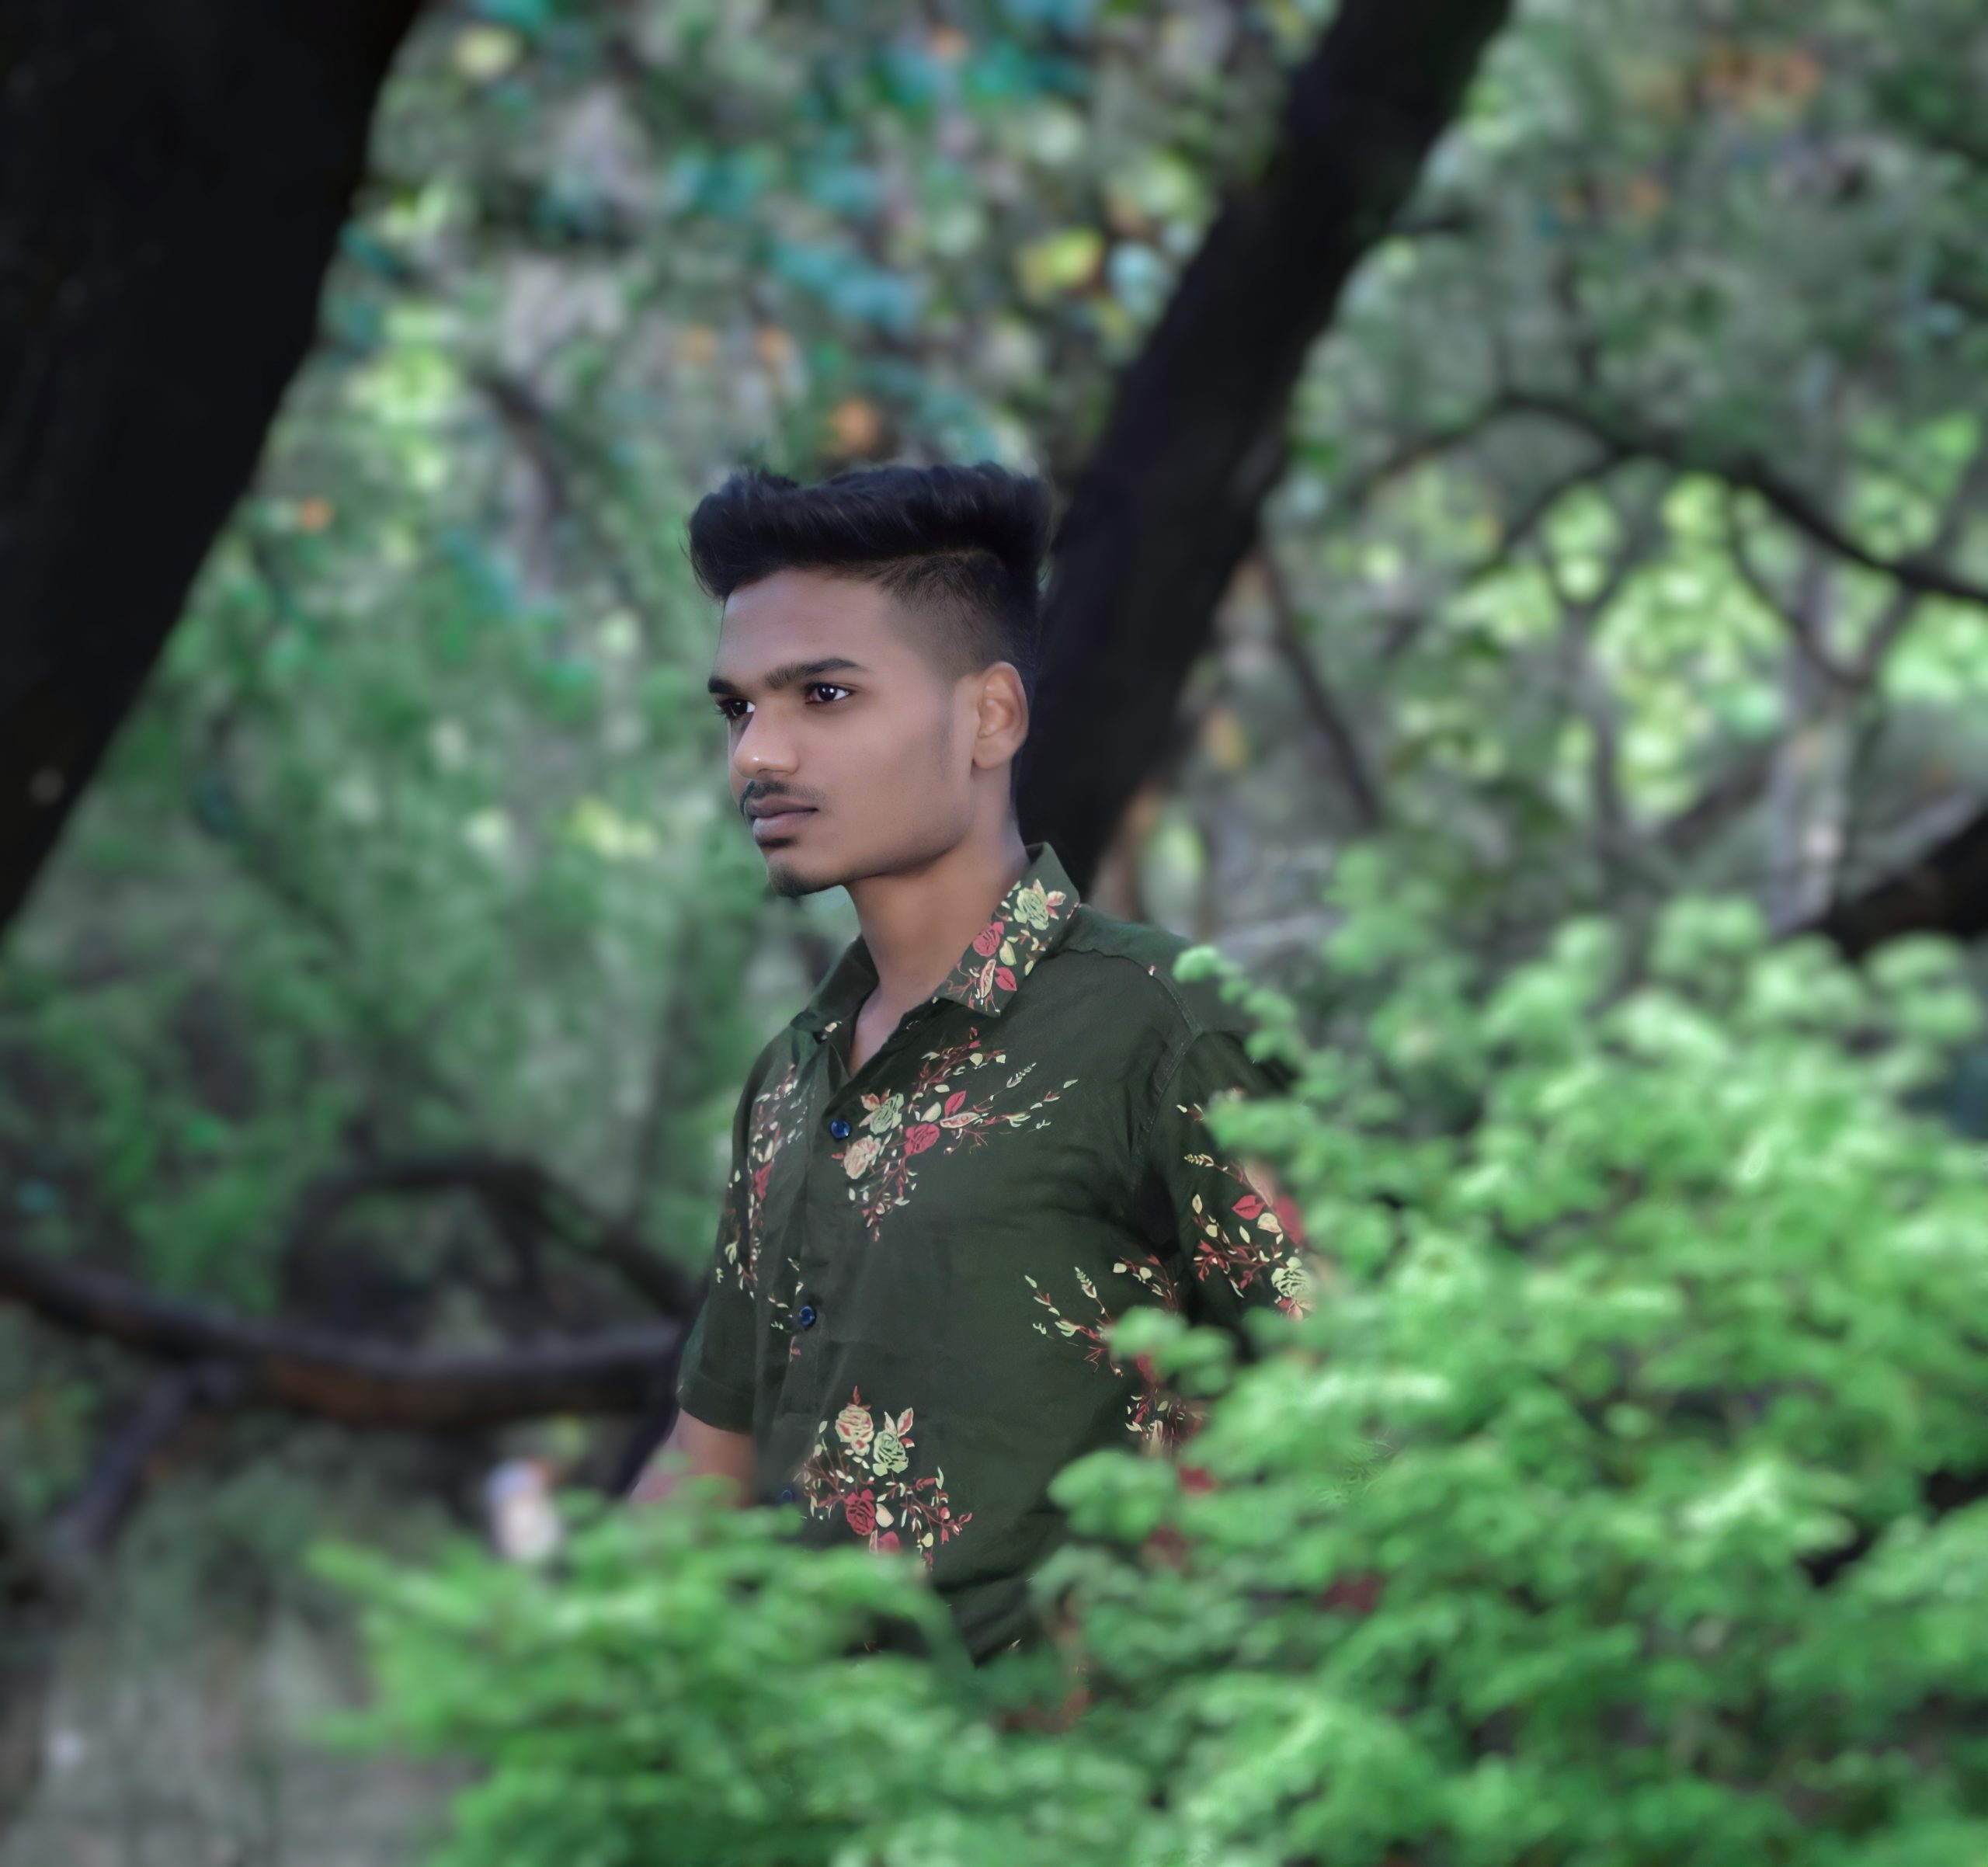 Indian Boy posing in the forest